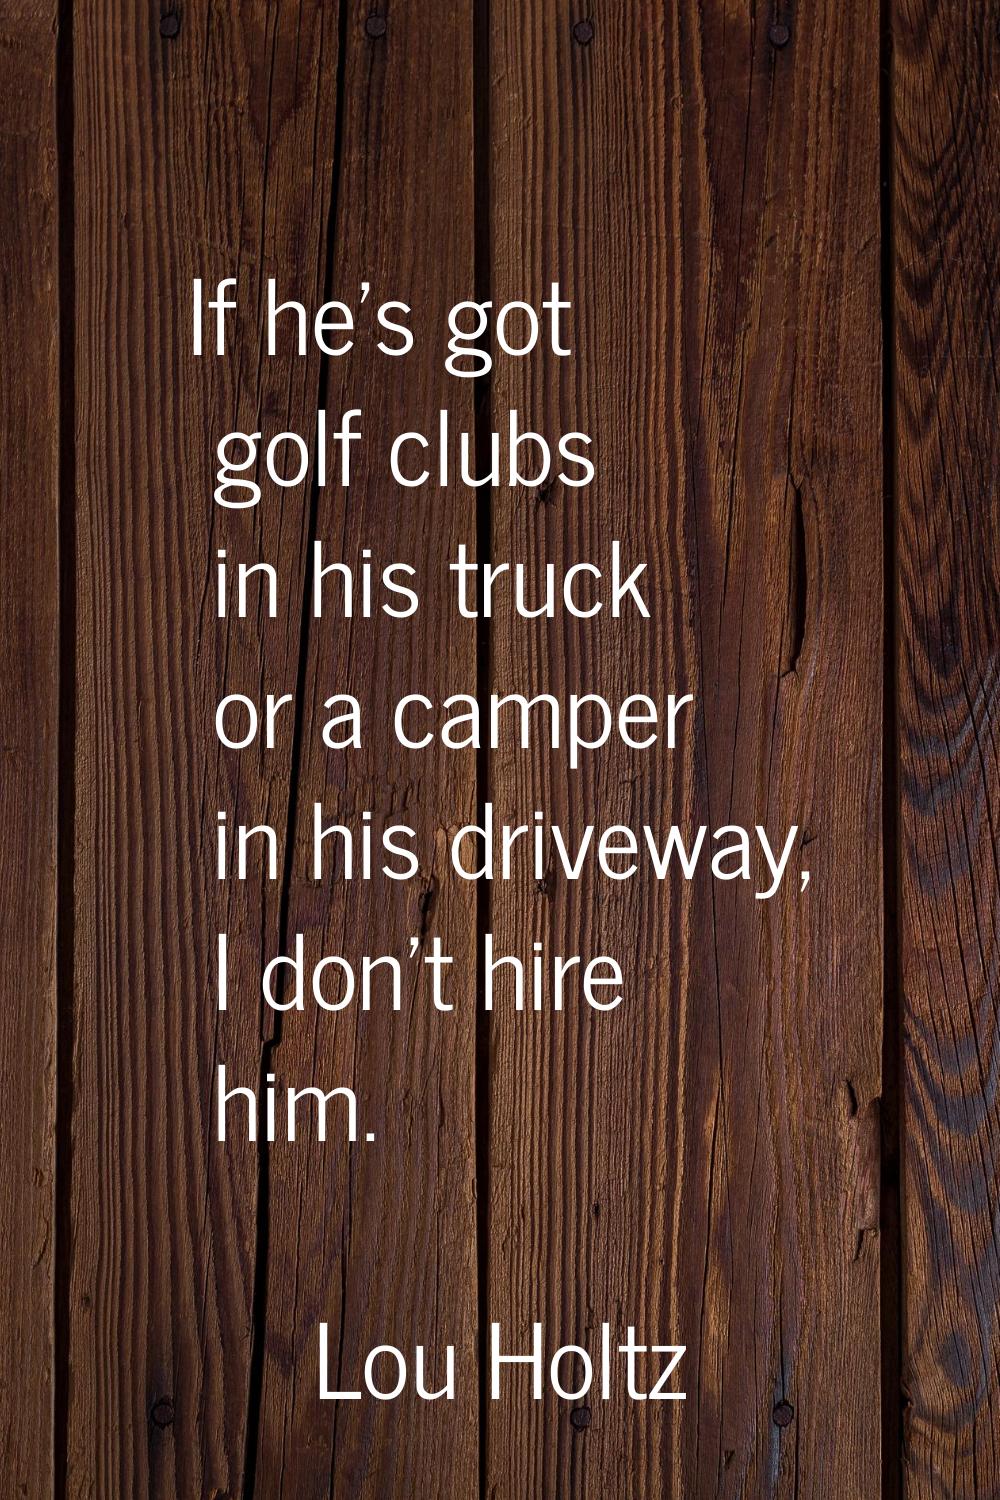 If he's got golf clubs in his truck or a camper in his driveway, I don't hire him.